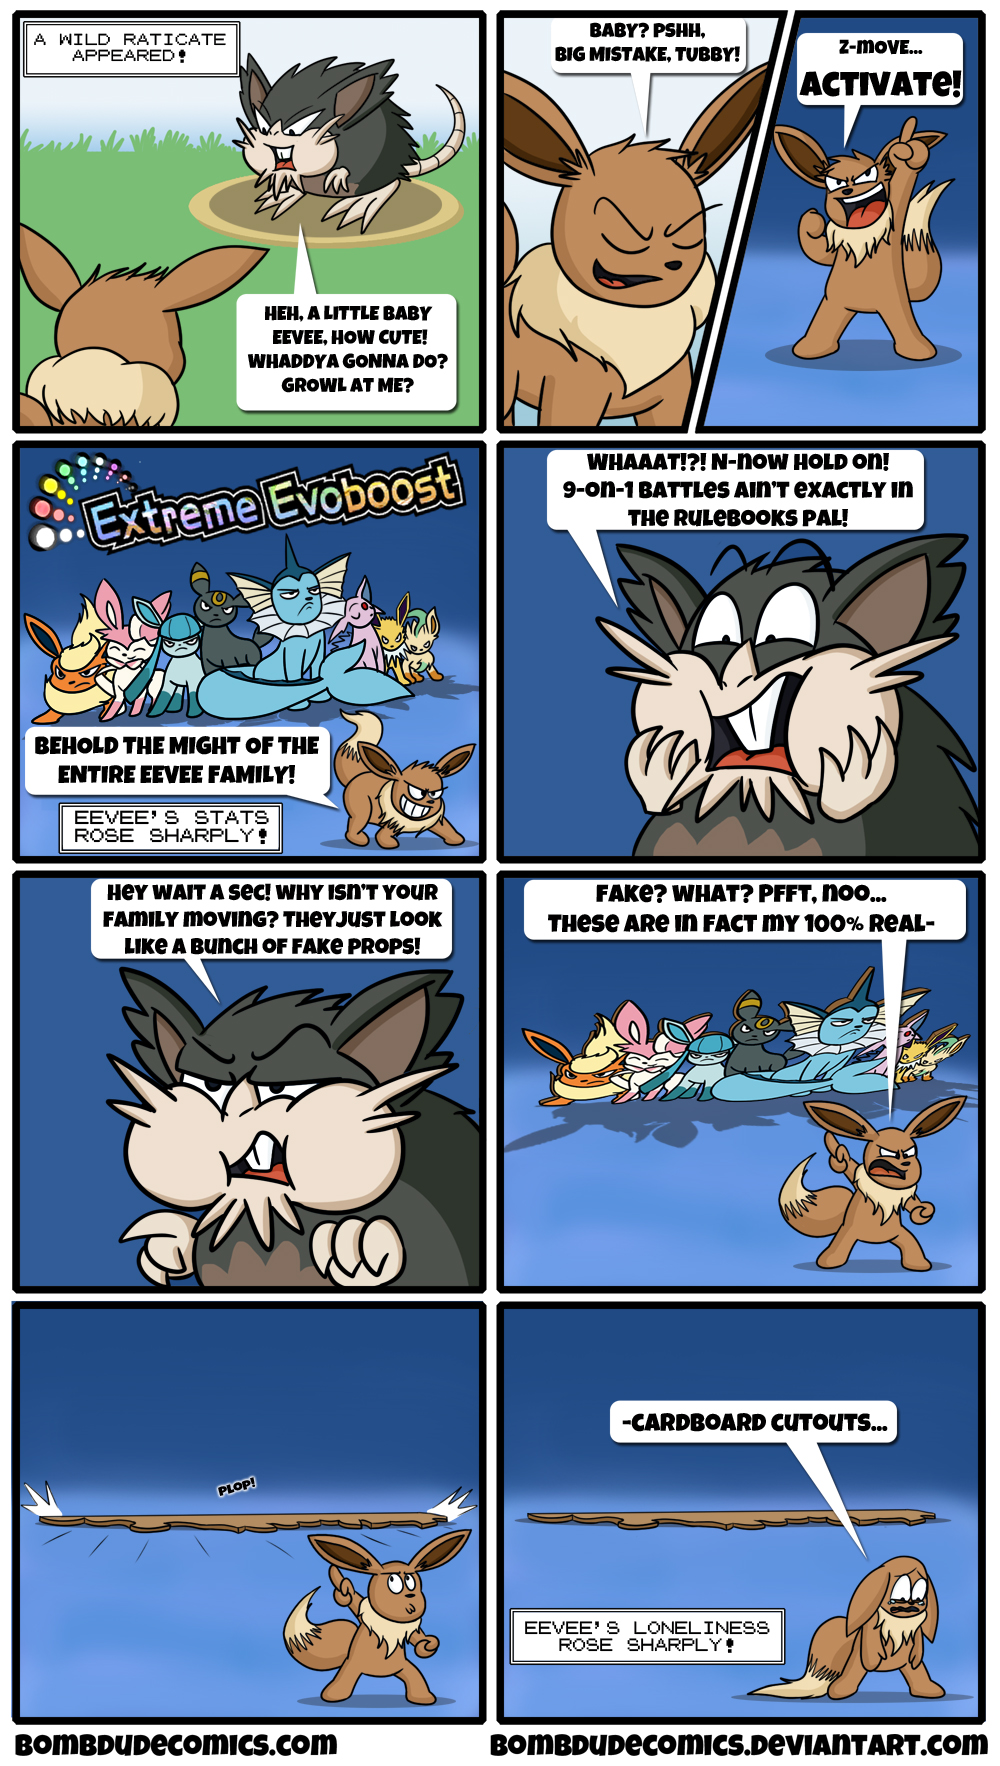 the_problem_with_eevee_s_z_move_by_bombdudecomics-dbmixkp.jpg